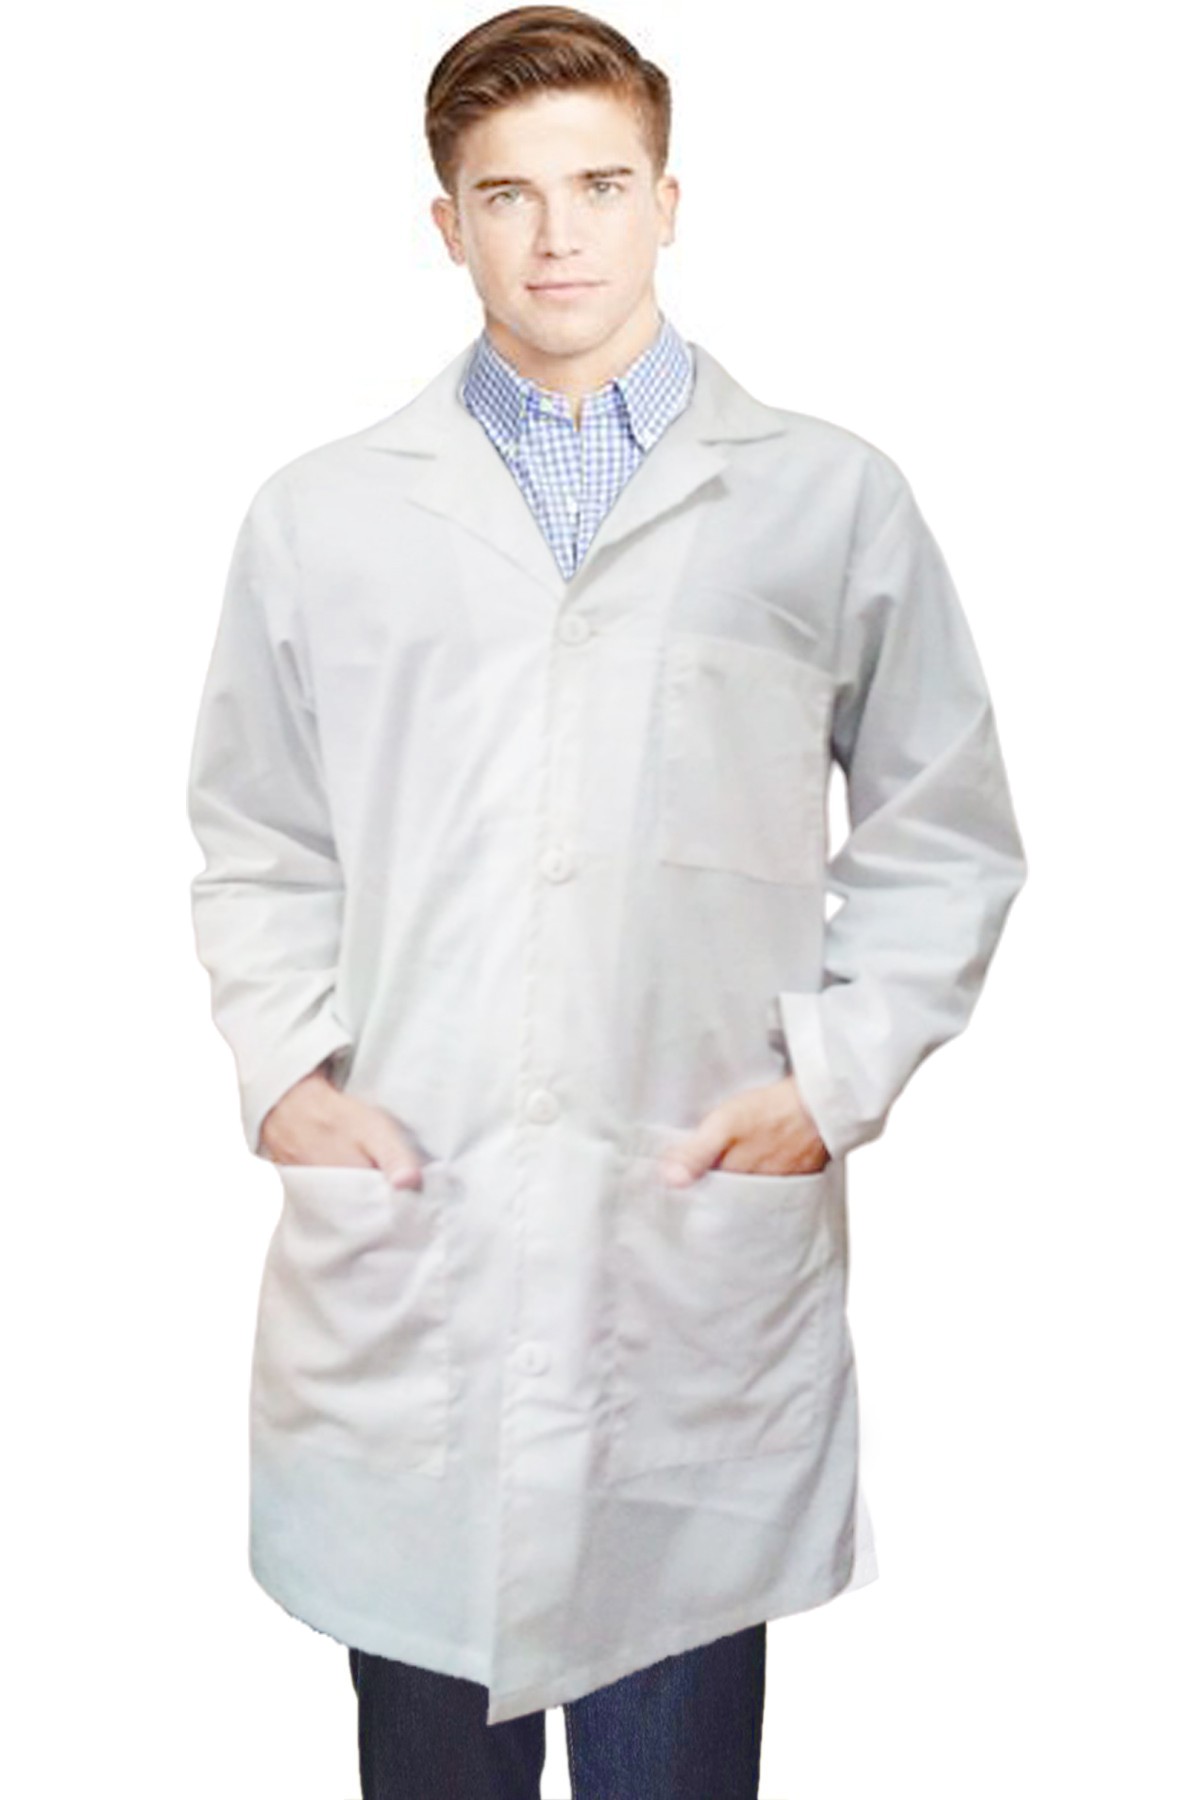 Canvas Heavy Lab Coat Unisex (170 gsm) Fabric  Full Sleeve With 4 pocket and Button Front Closure(Lenght 36",38",40",42")